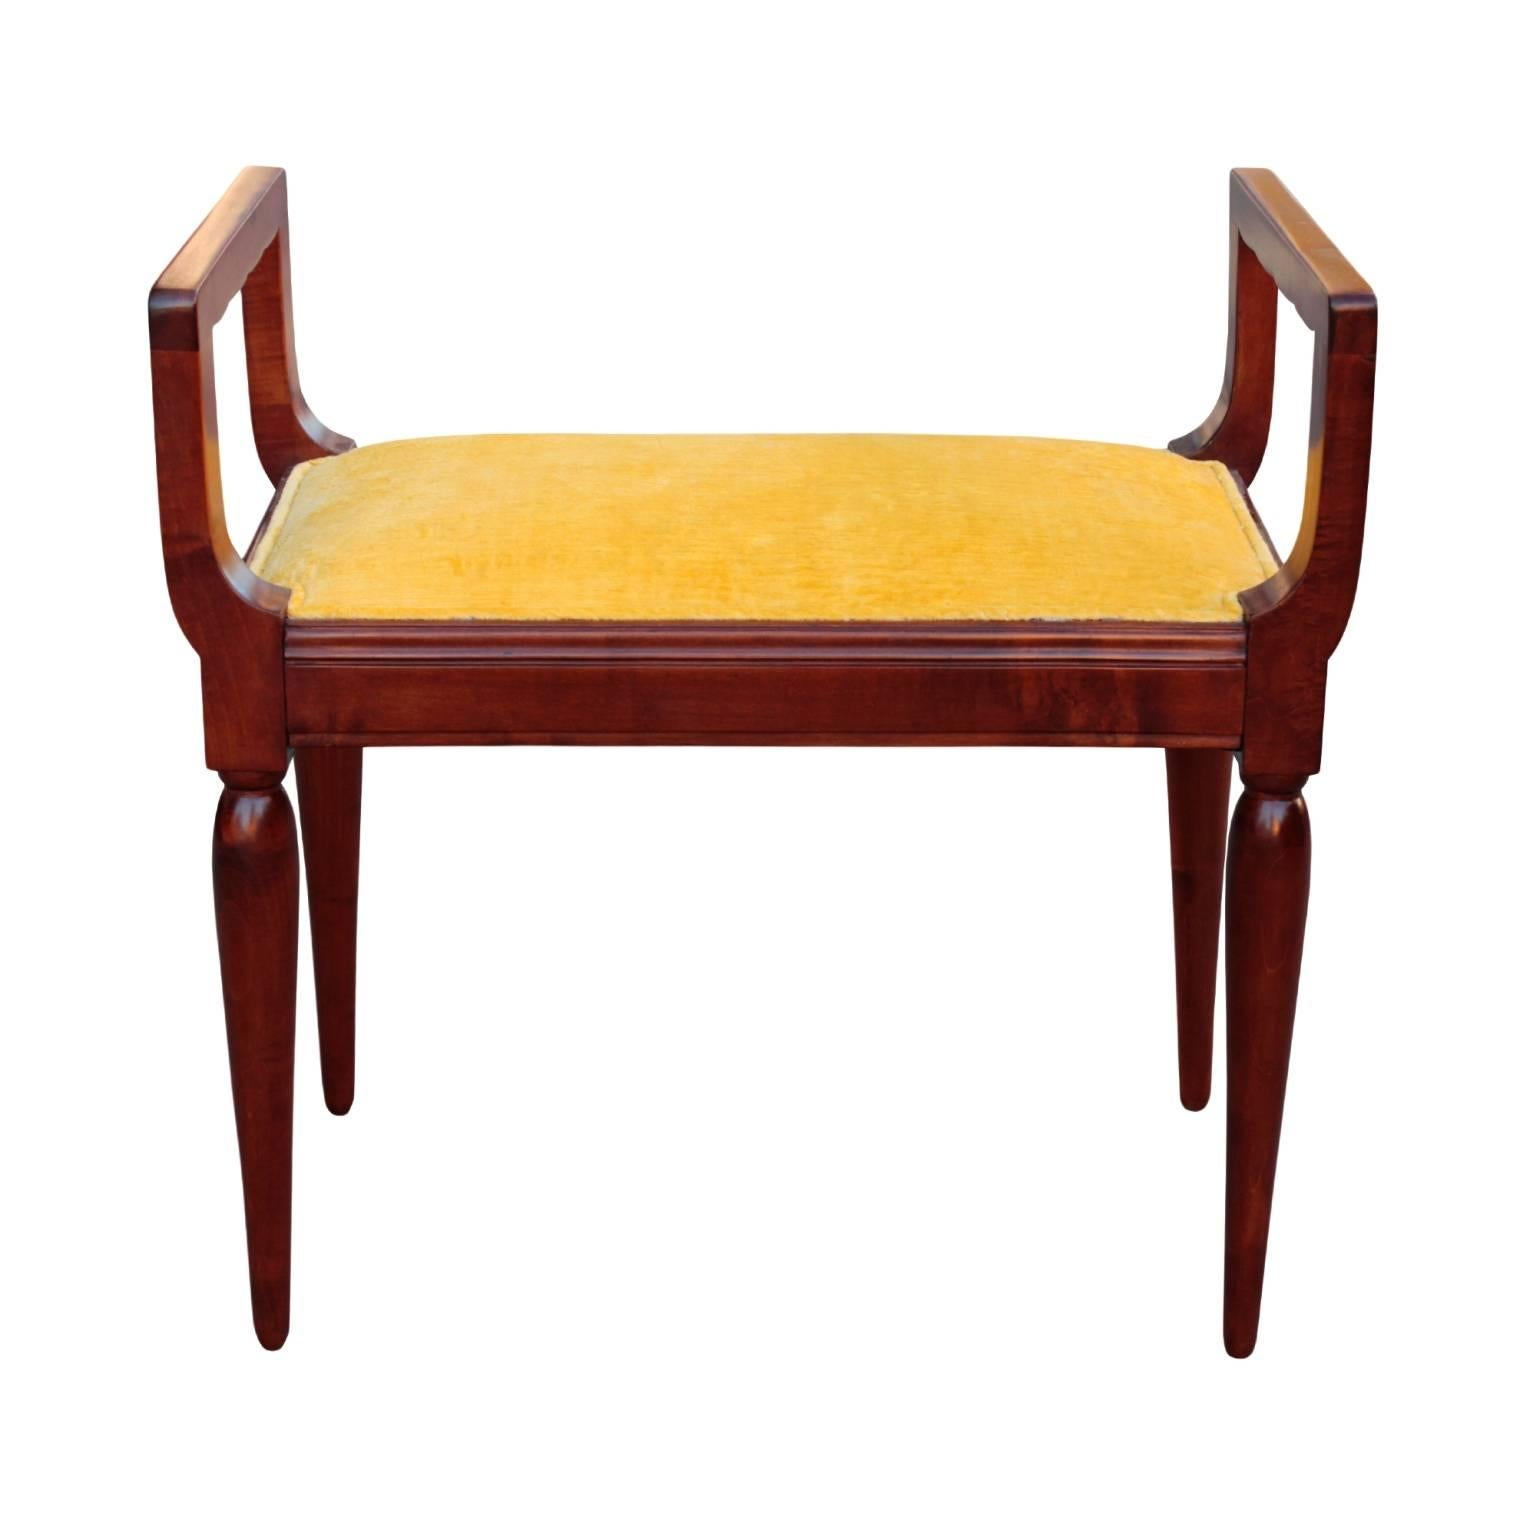 Fine bench featuring sculpted arms, elegant conical legs, channeled seat frame and seat with luxurious Lee Jofa velvet. In sycamore. 

Measure: Seat height 18